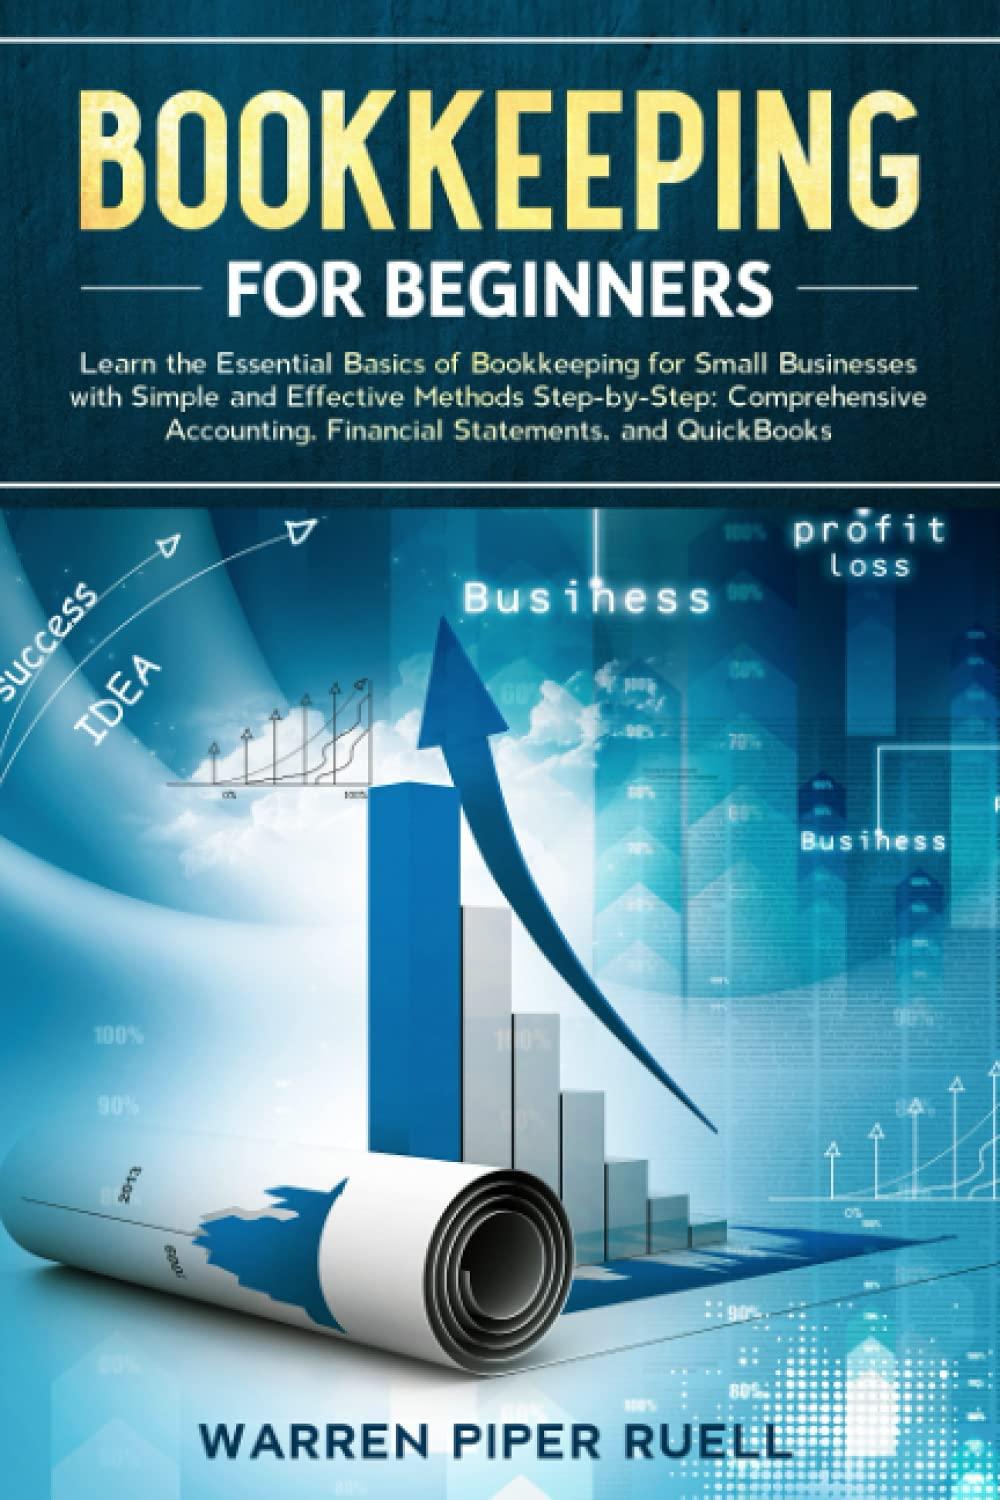 bookkeeping for beginners learn the essential basics of bookkeeping for small businesses with simple and